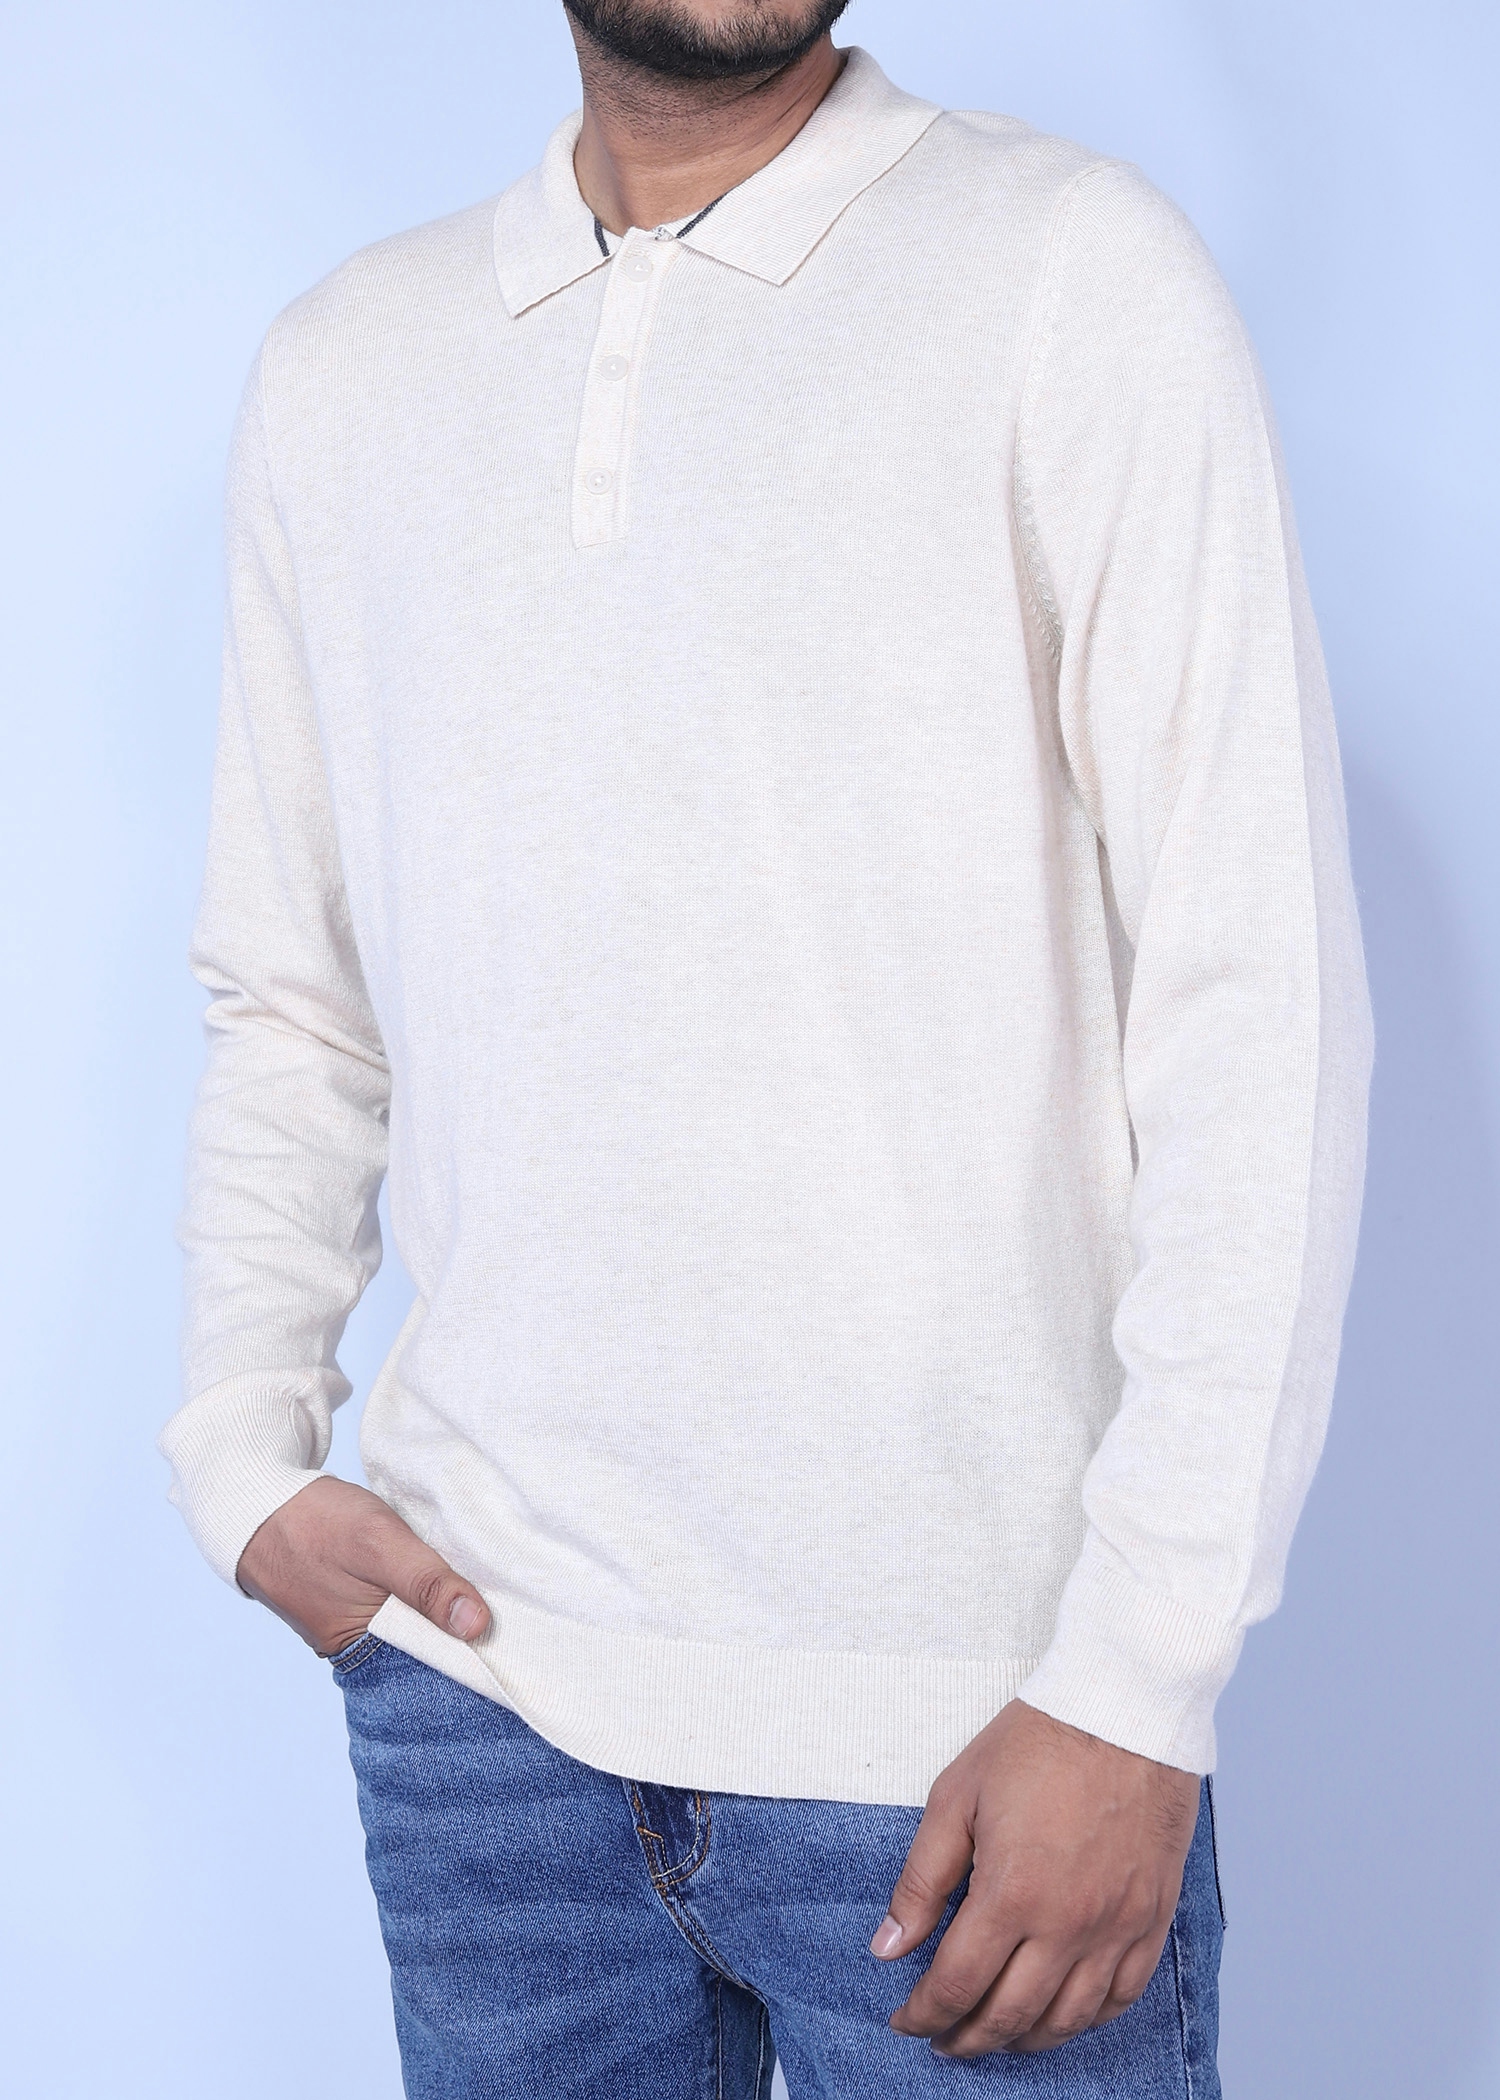 athens sweater ivory color half side view